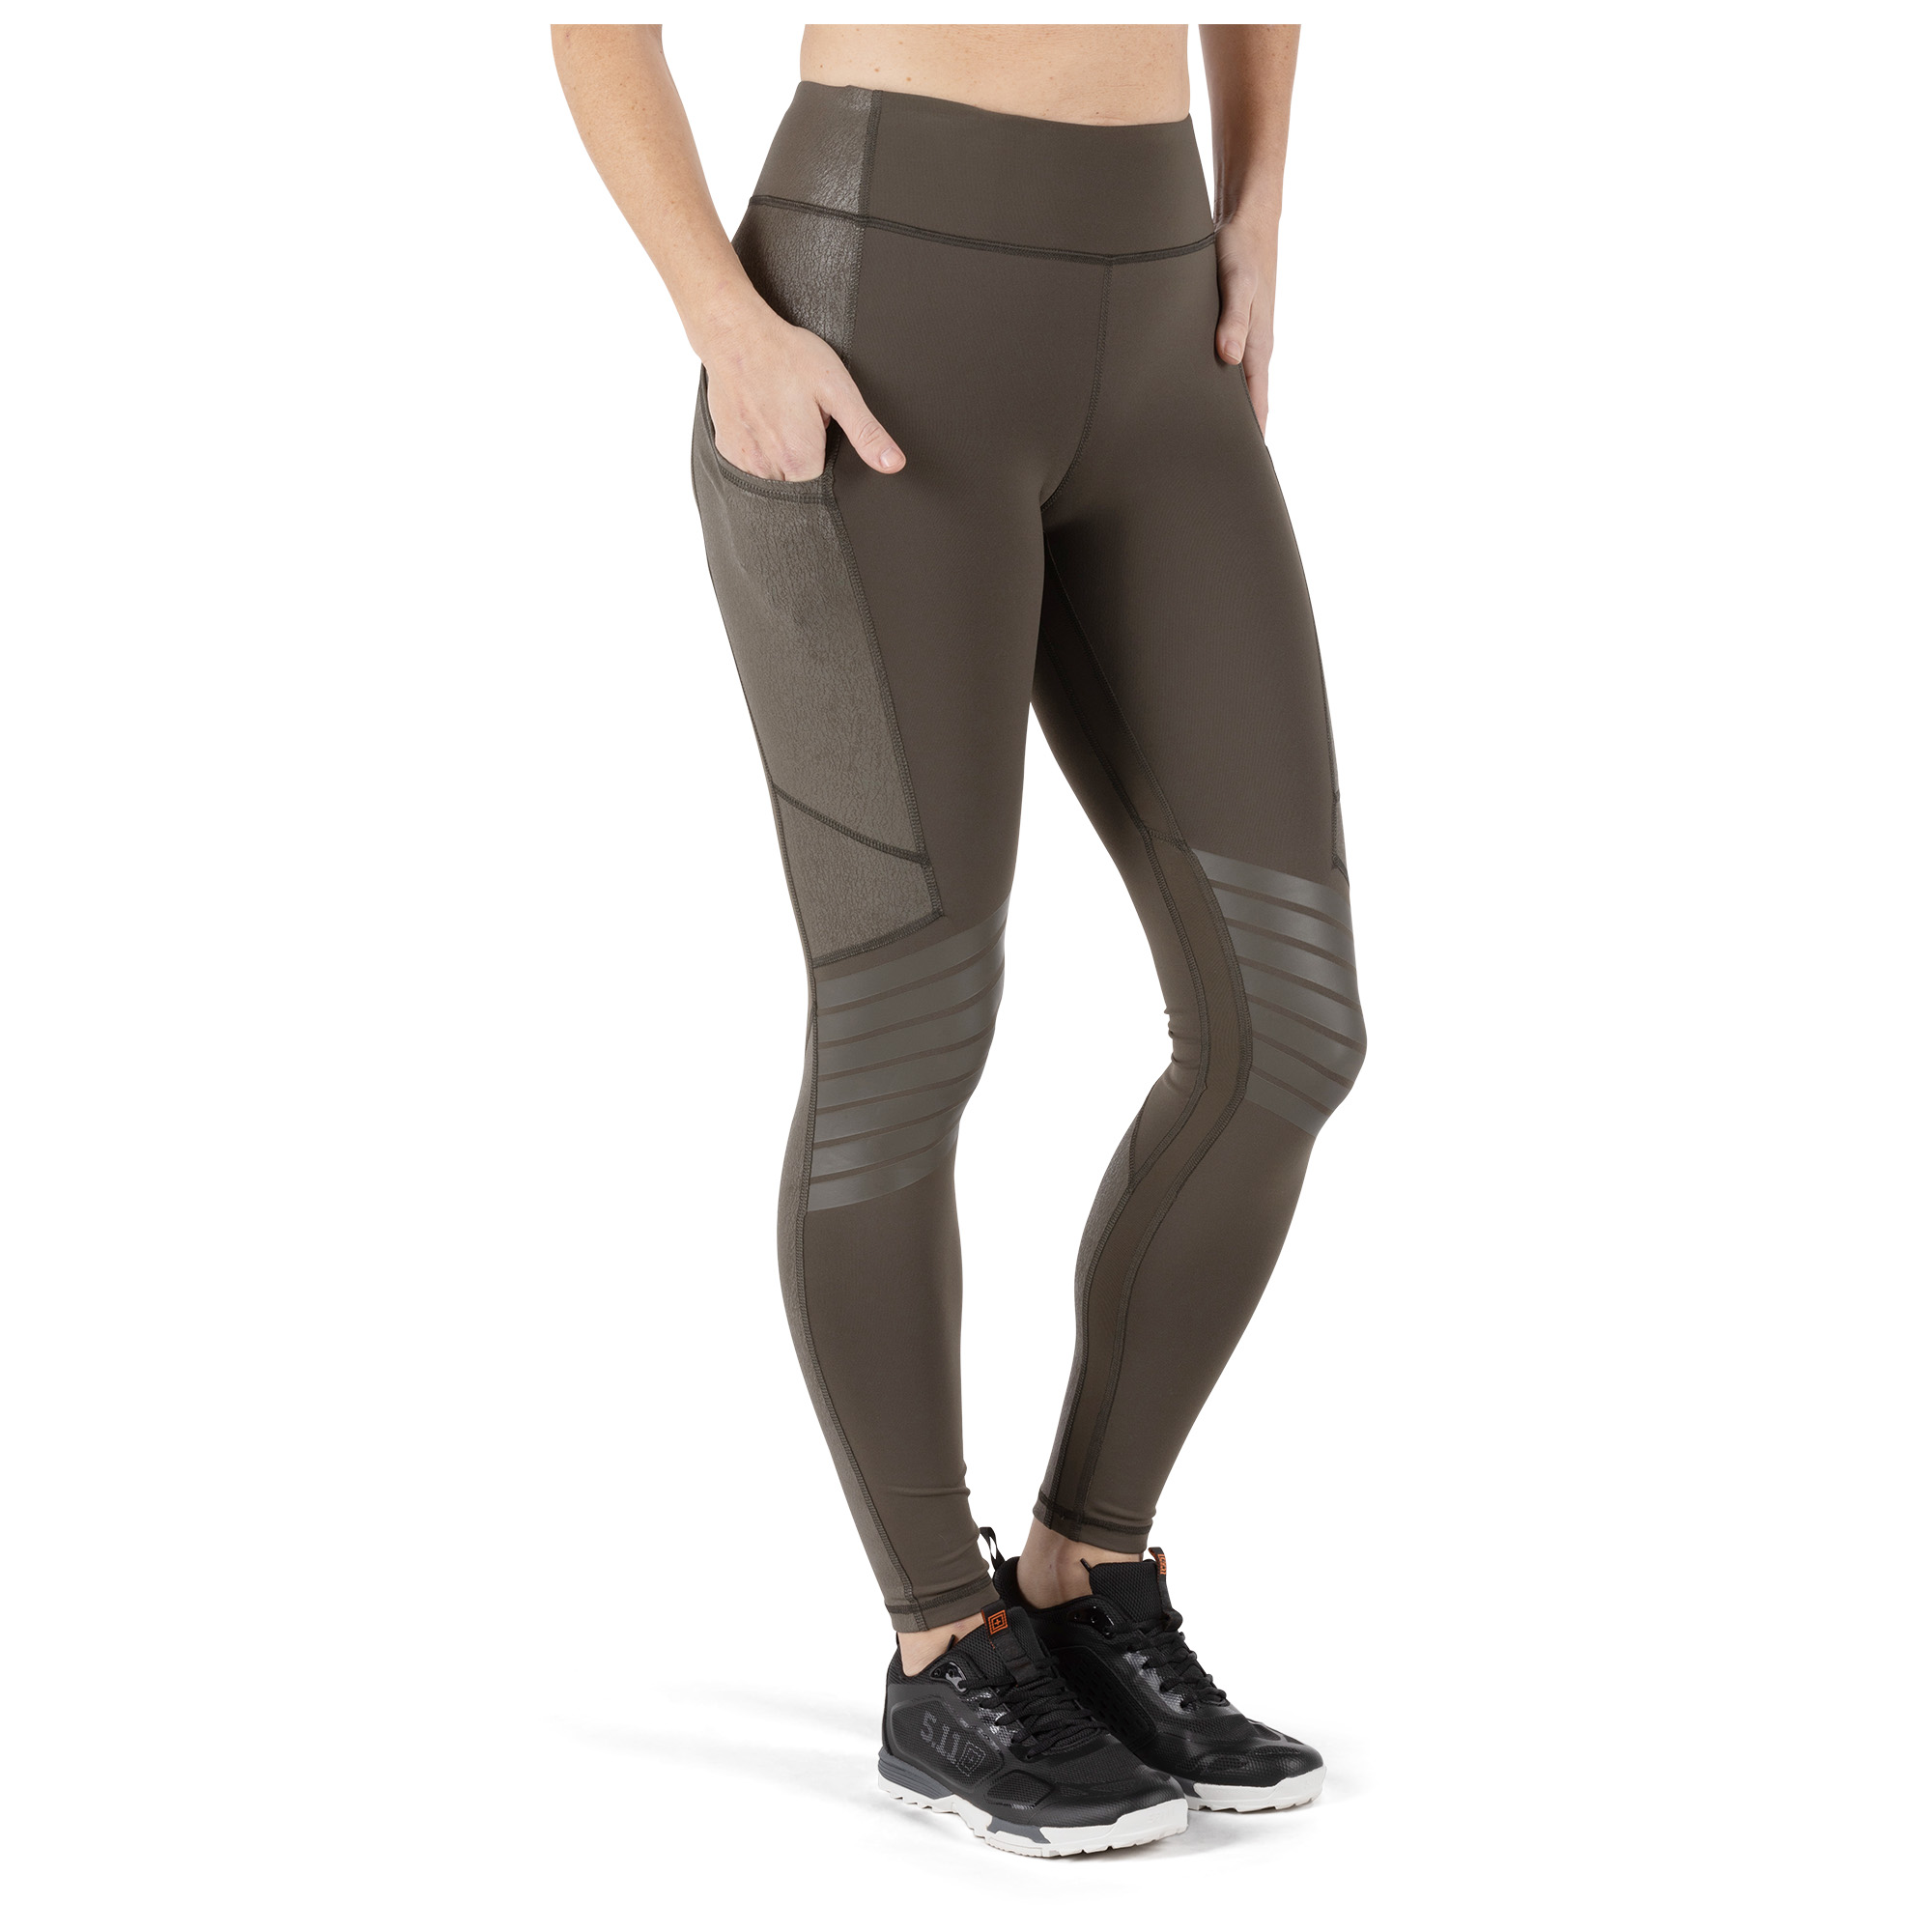 5.11 Tactical Women's Abby Tight